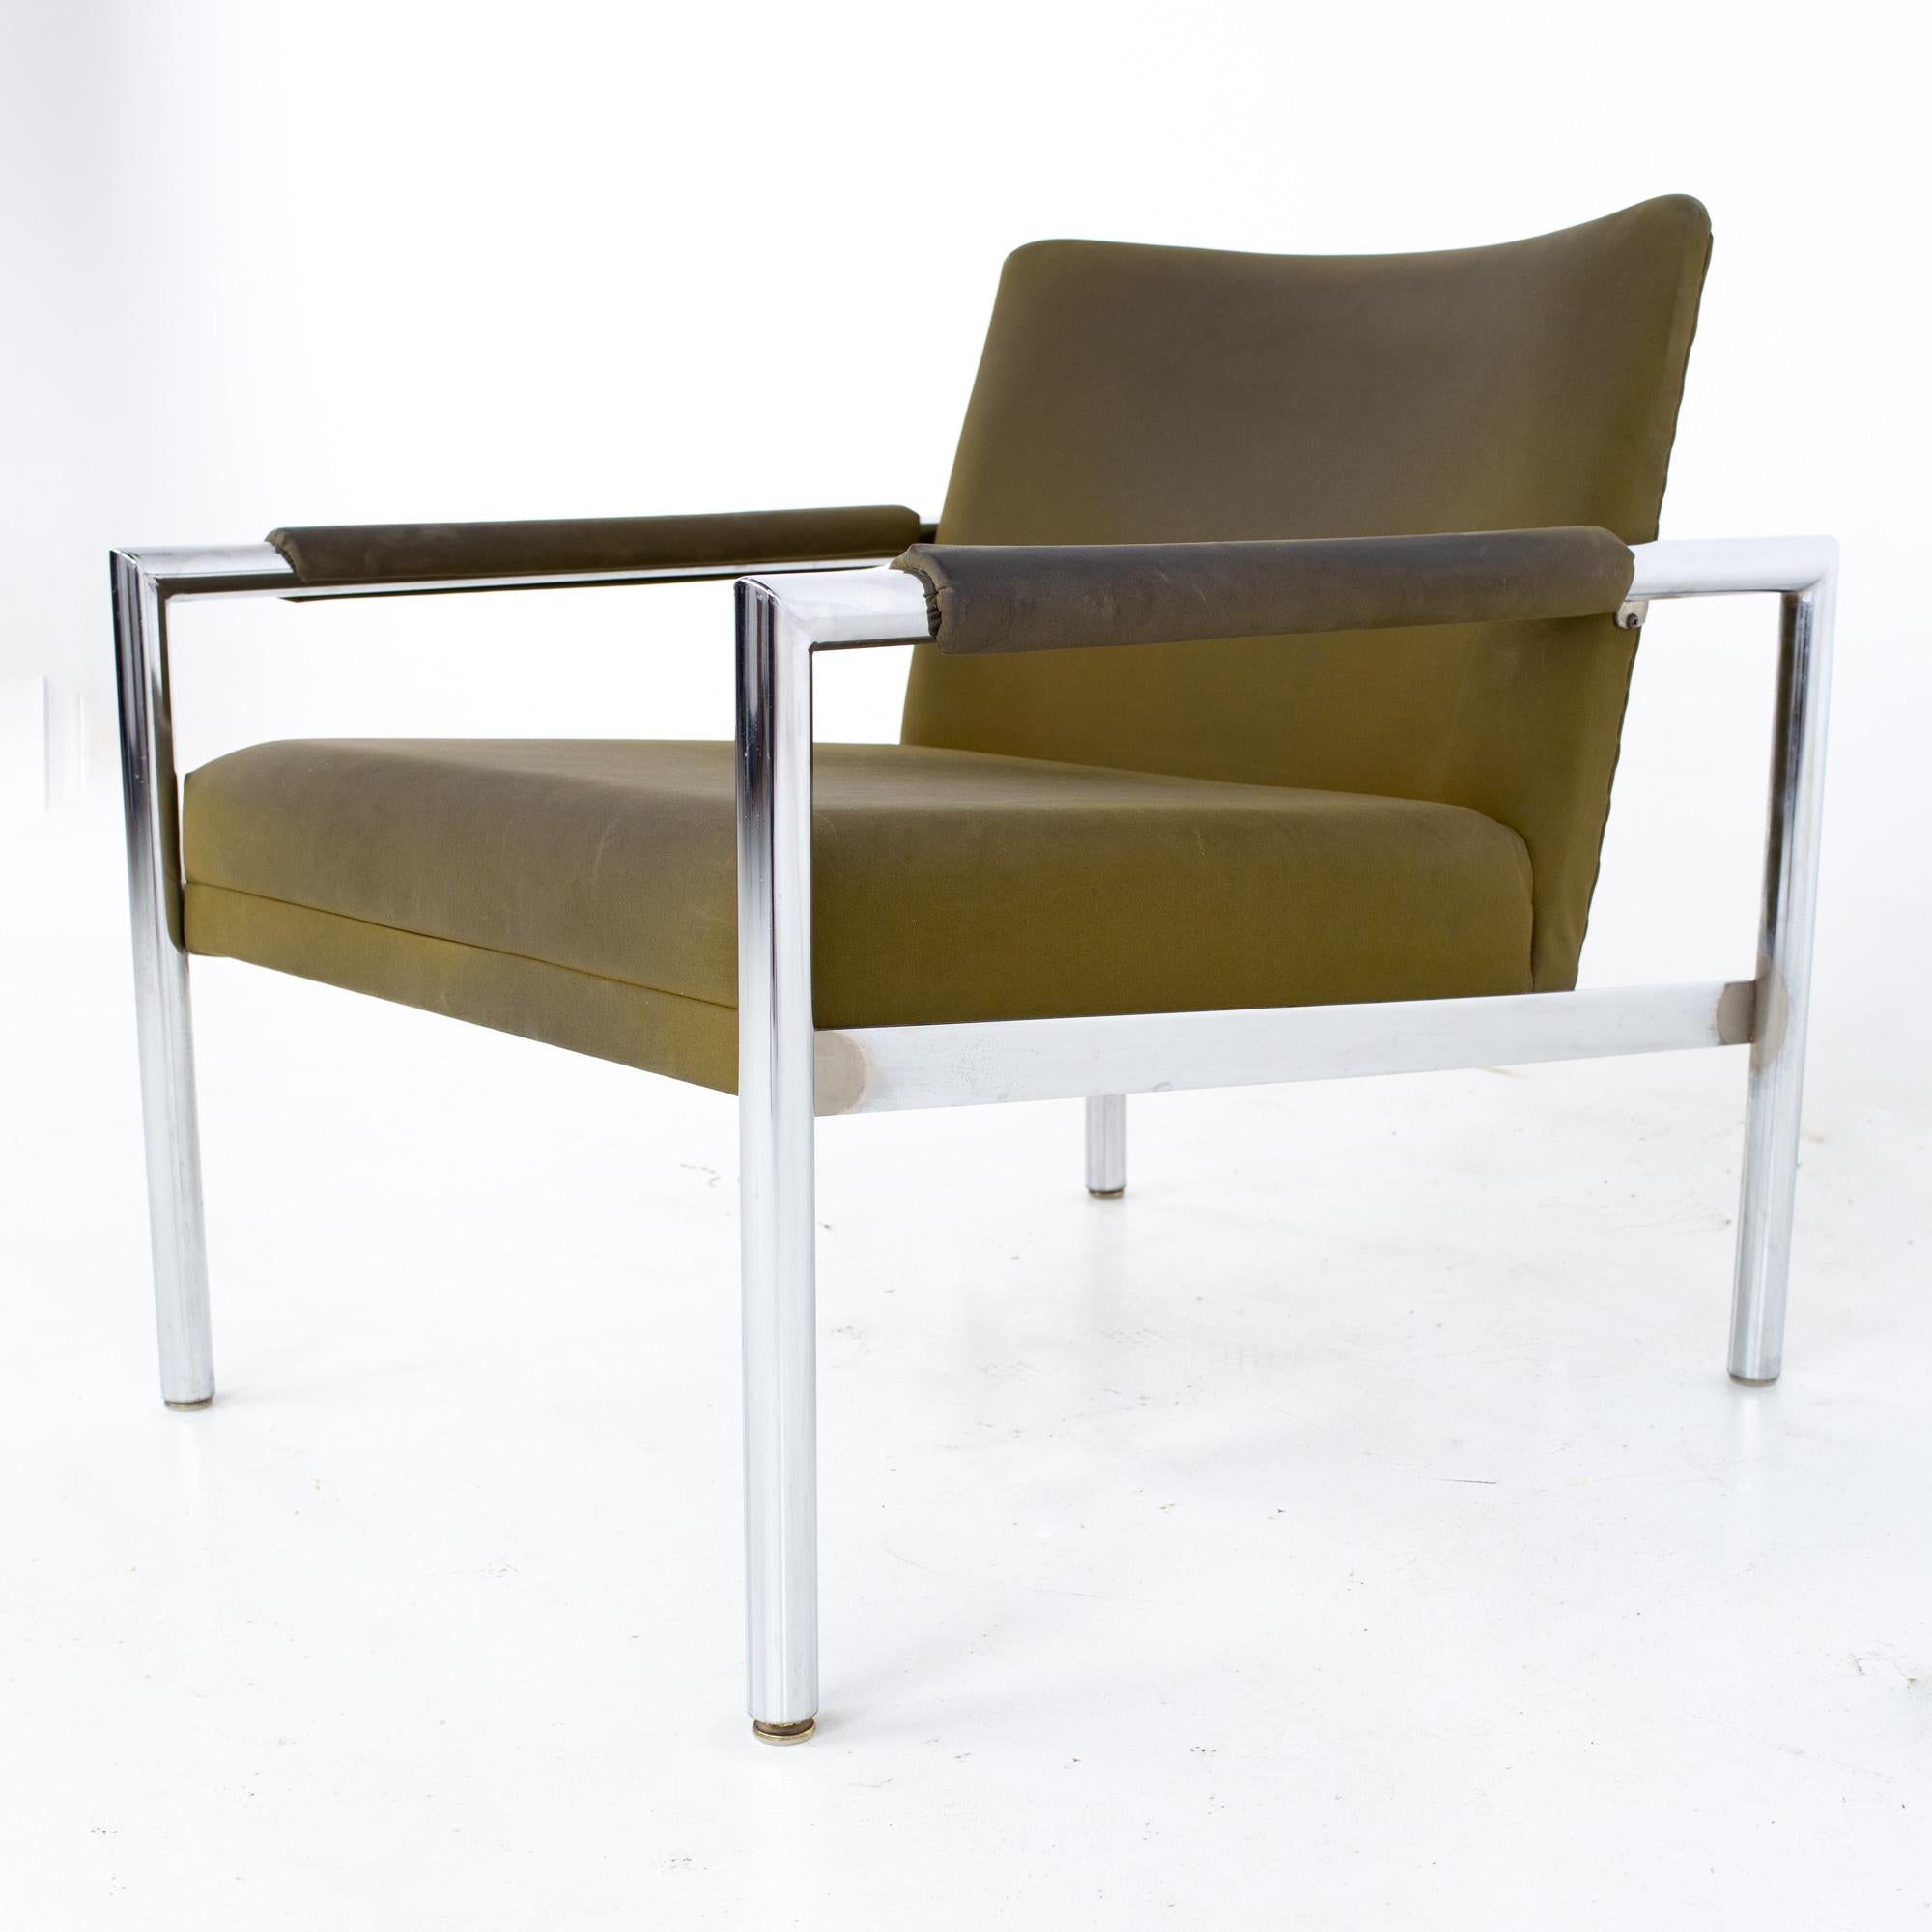 Upholstery Jack Cartwright for Founders Style Mid Century Chrome Lounge Chairs, a Pair